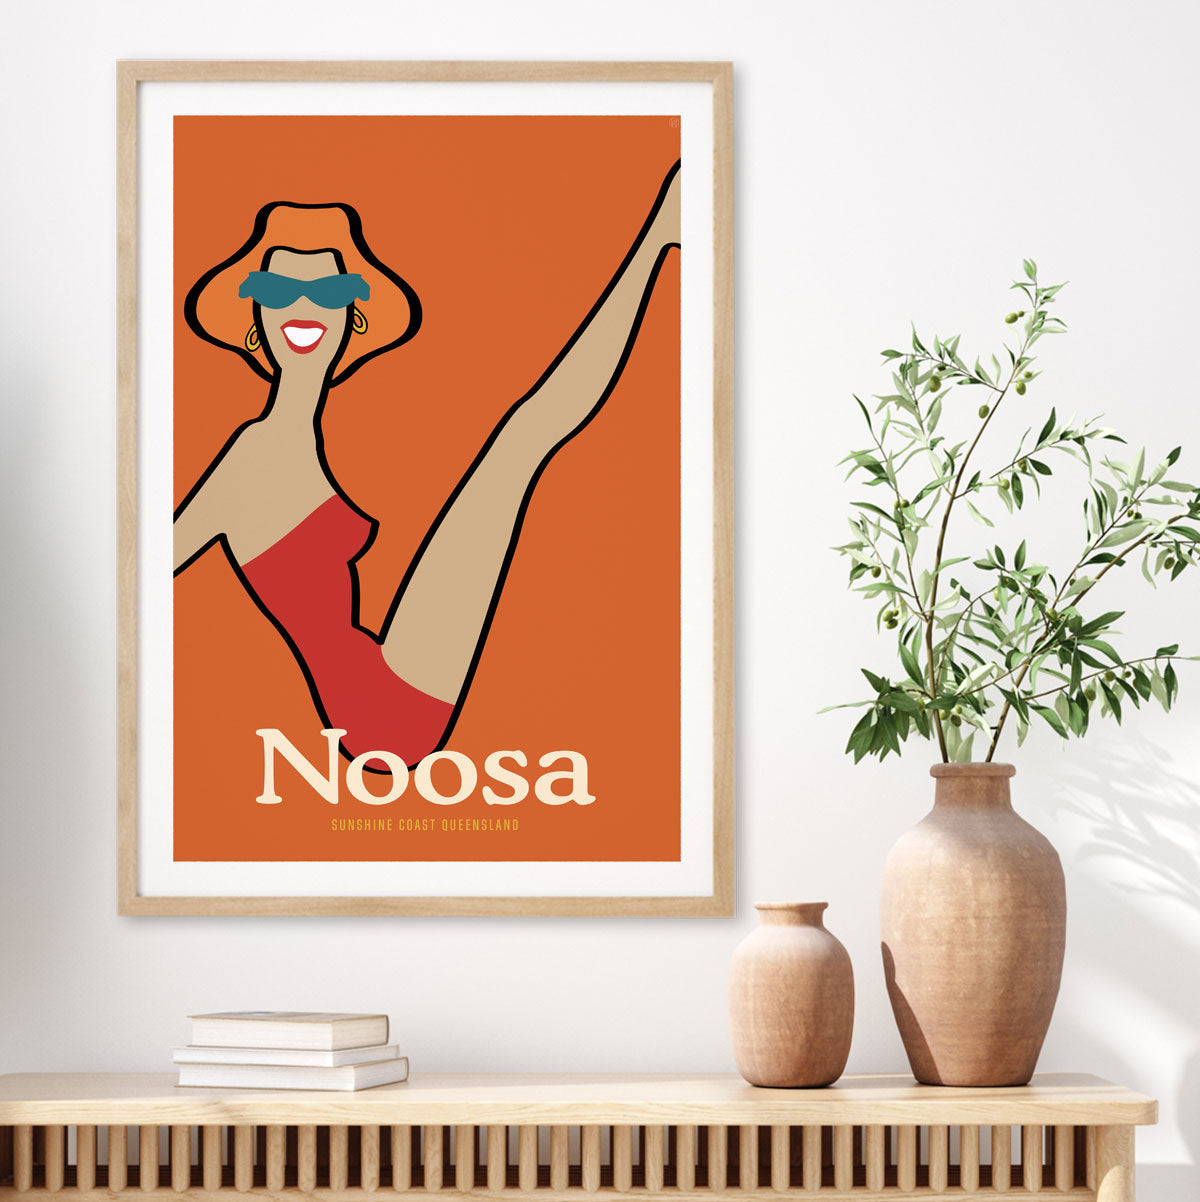 Noosa Queensland vintage retro poster from Places We Luv